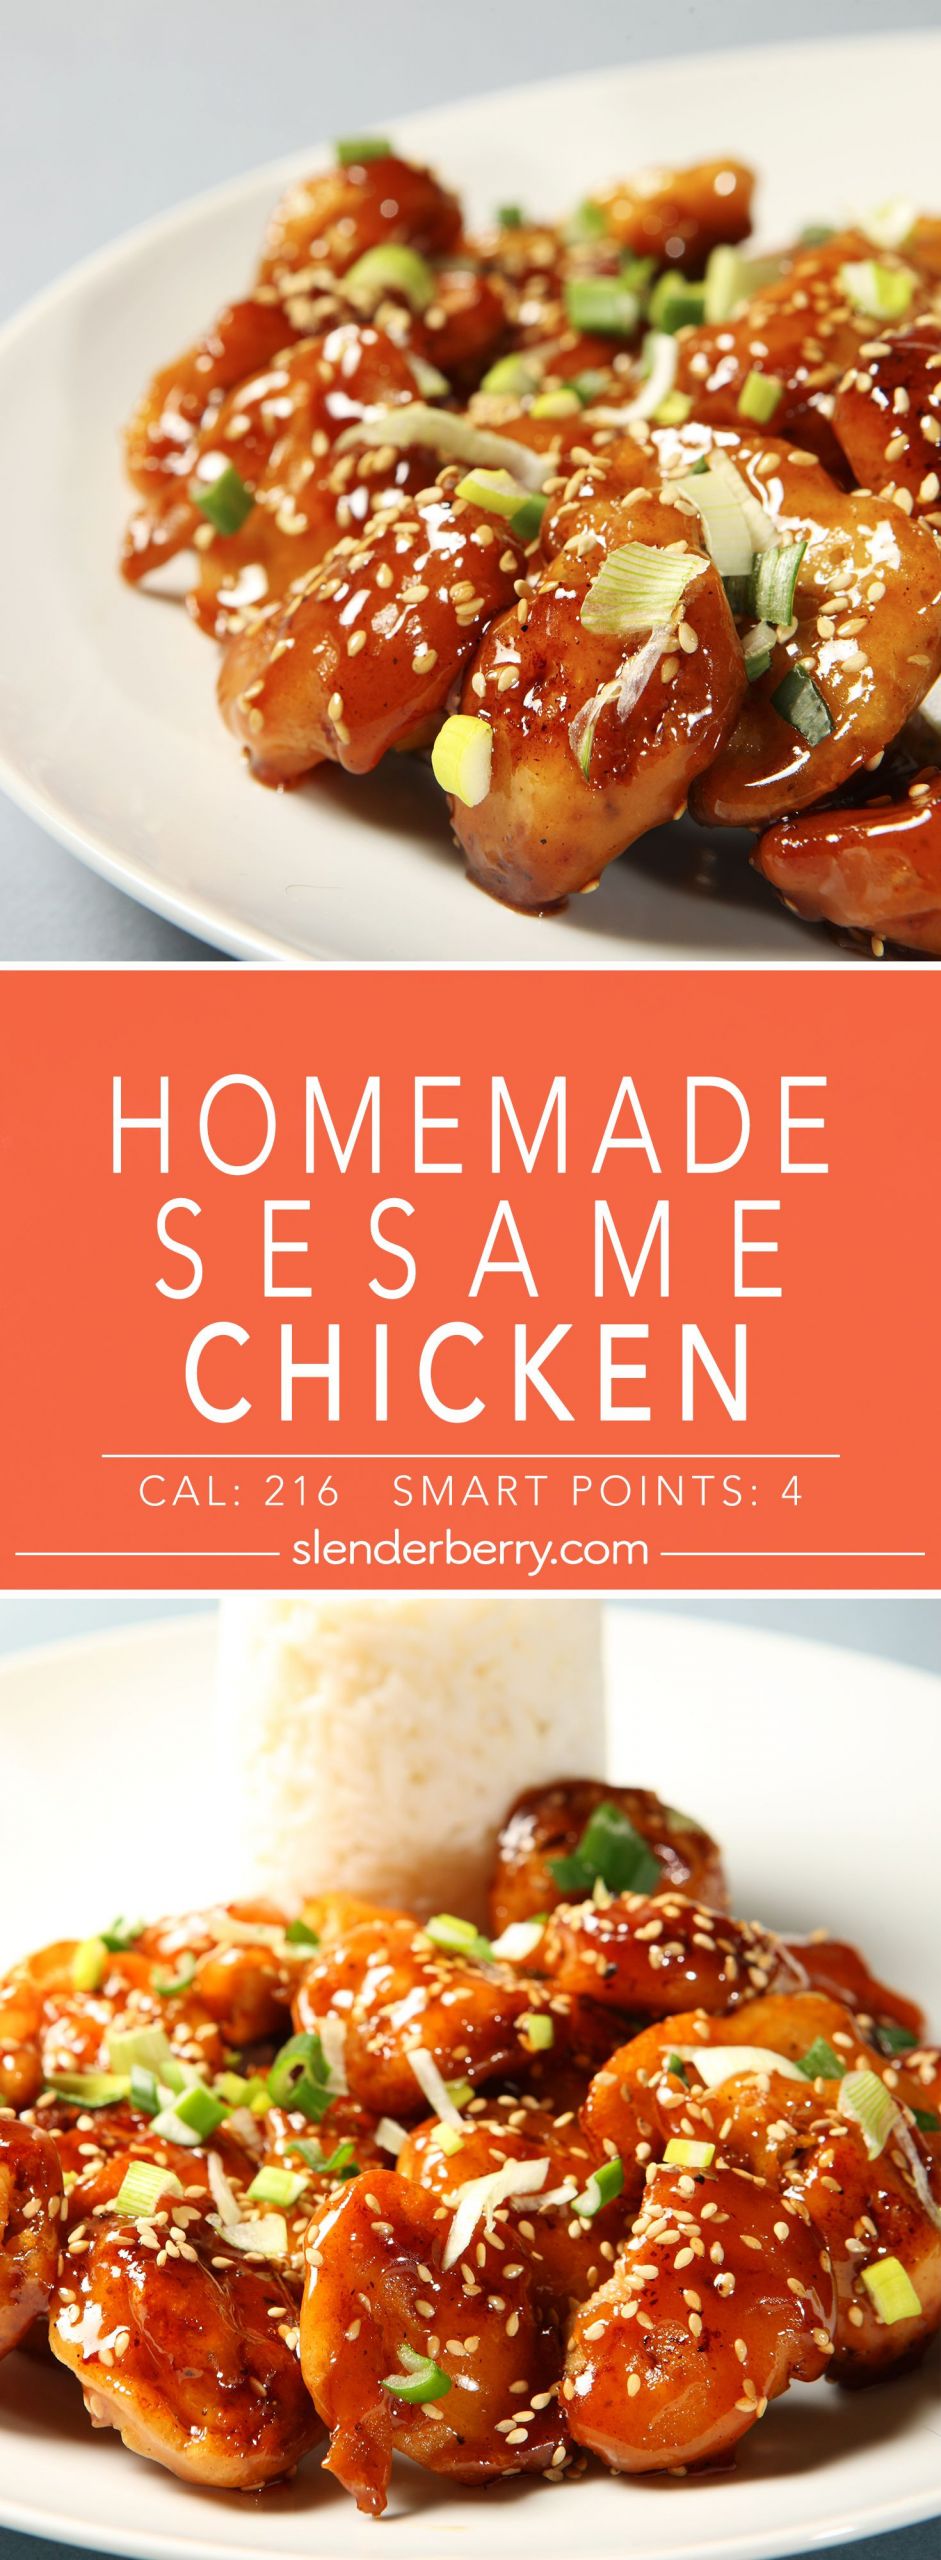 Low Calorie Chinese Food Recipes
 Homemade Sesame Chicken Recipe